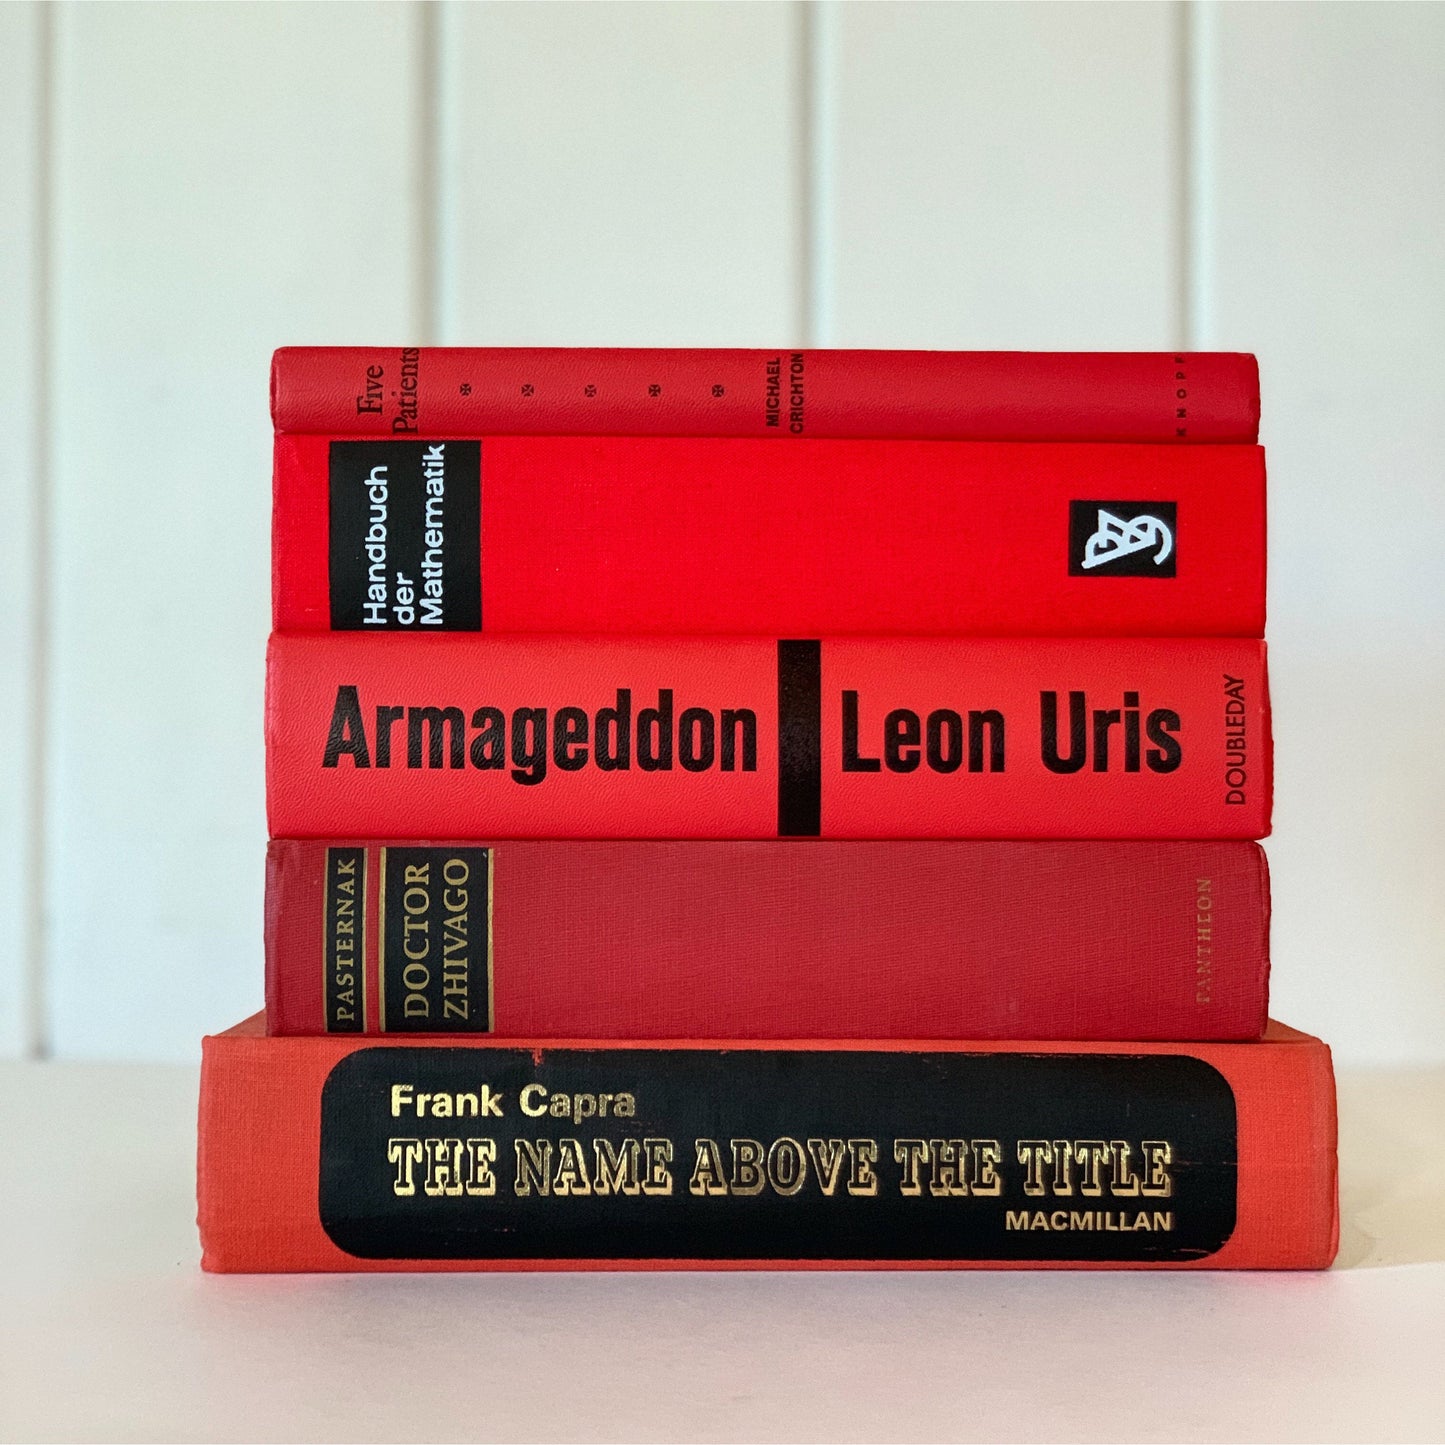 Red and Black Mid-Century Modern Decorative Books for Display